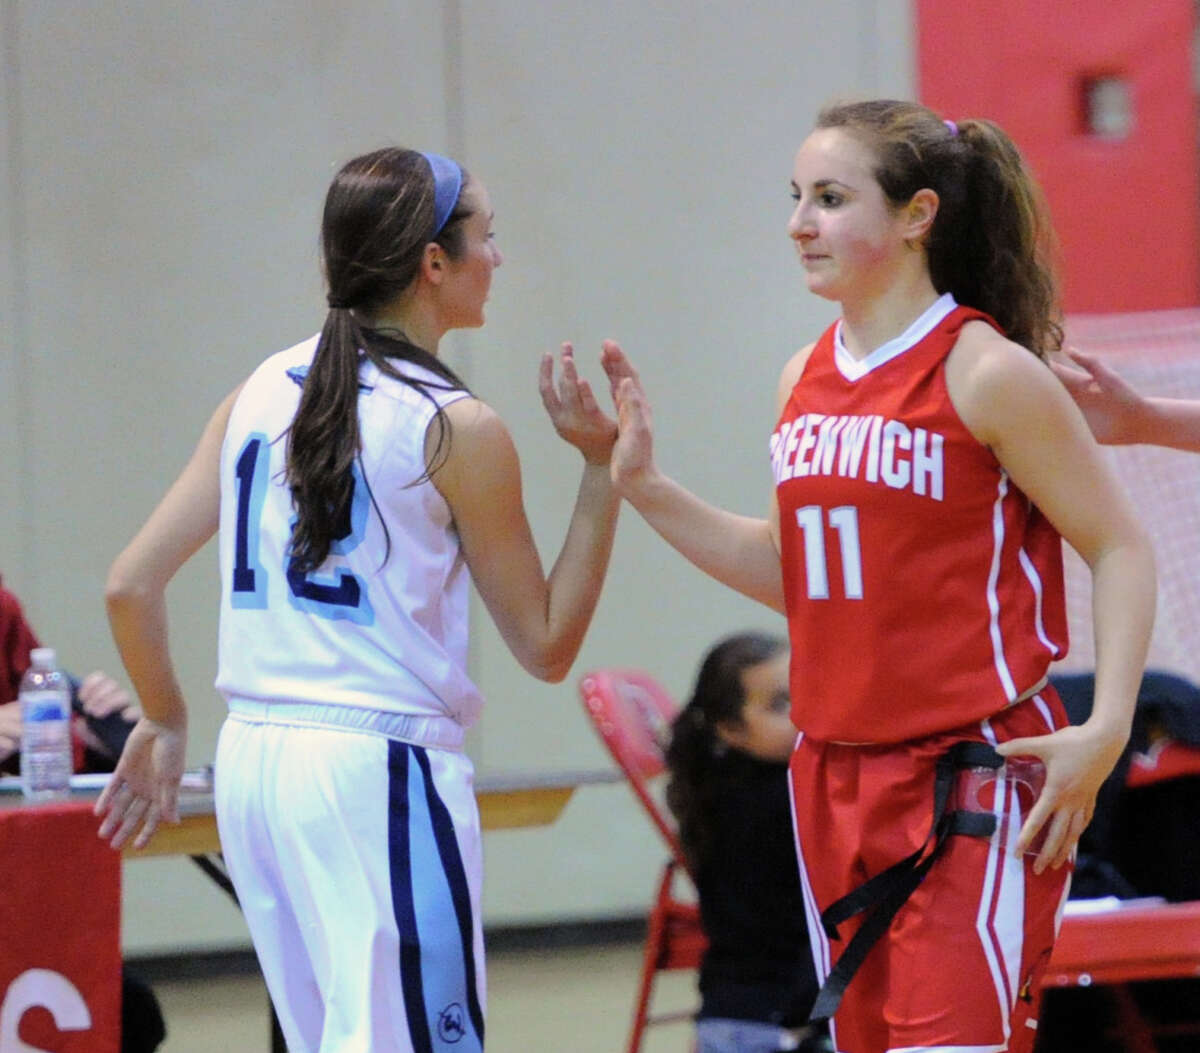 At left, Haley English (#12) of Wilton high-fives Alexa Moses (#11) of Greenwich at the conclusion of the girls high school basketball game between Greenwich High School and Wilton High School at Greenwich, Friday, Jan. 24, 2014. Wilton defeated Greenwich, 49-40.